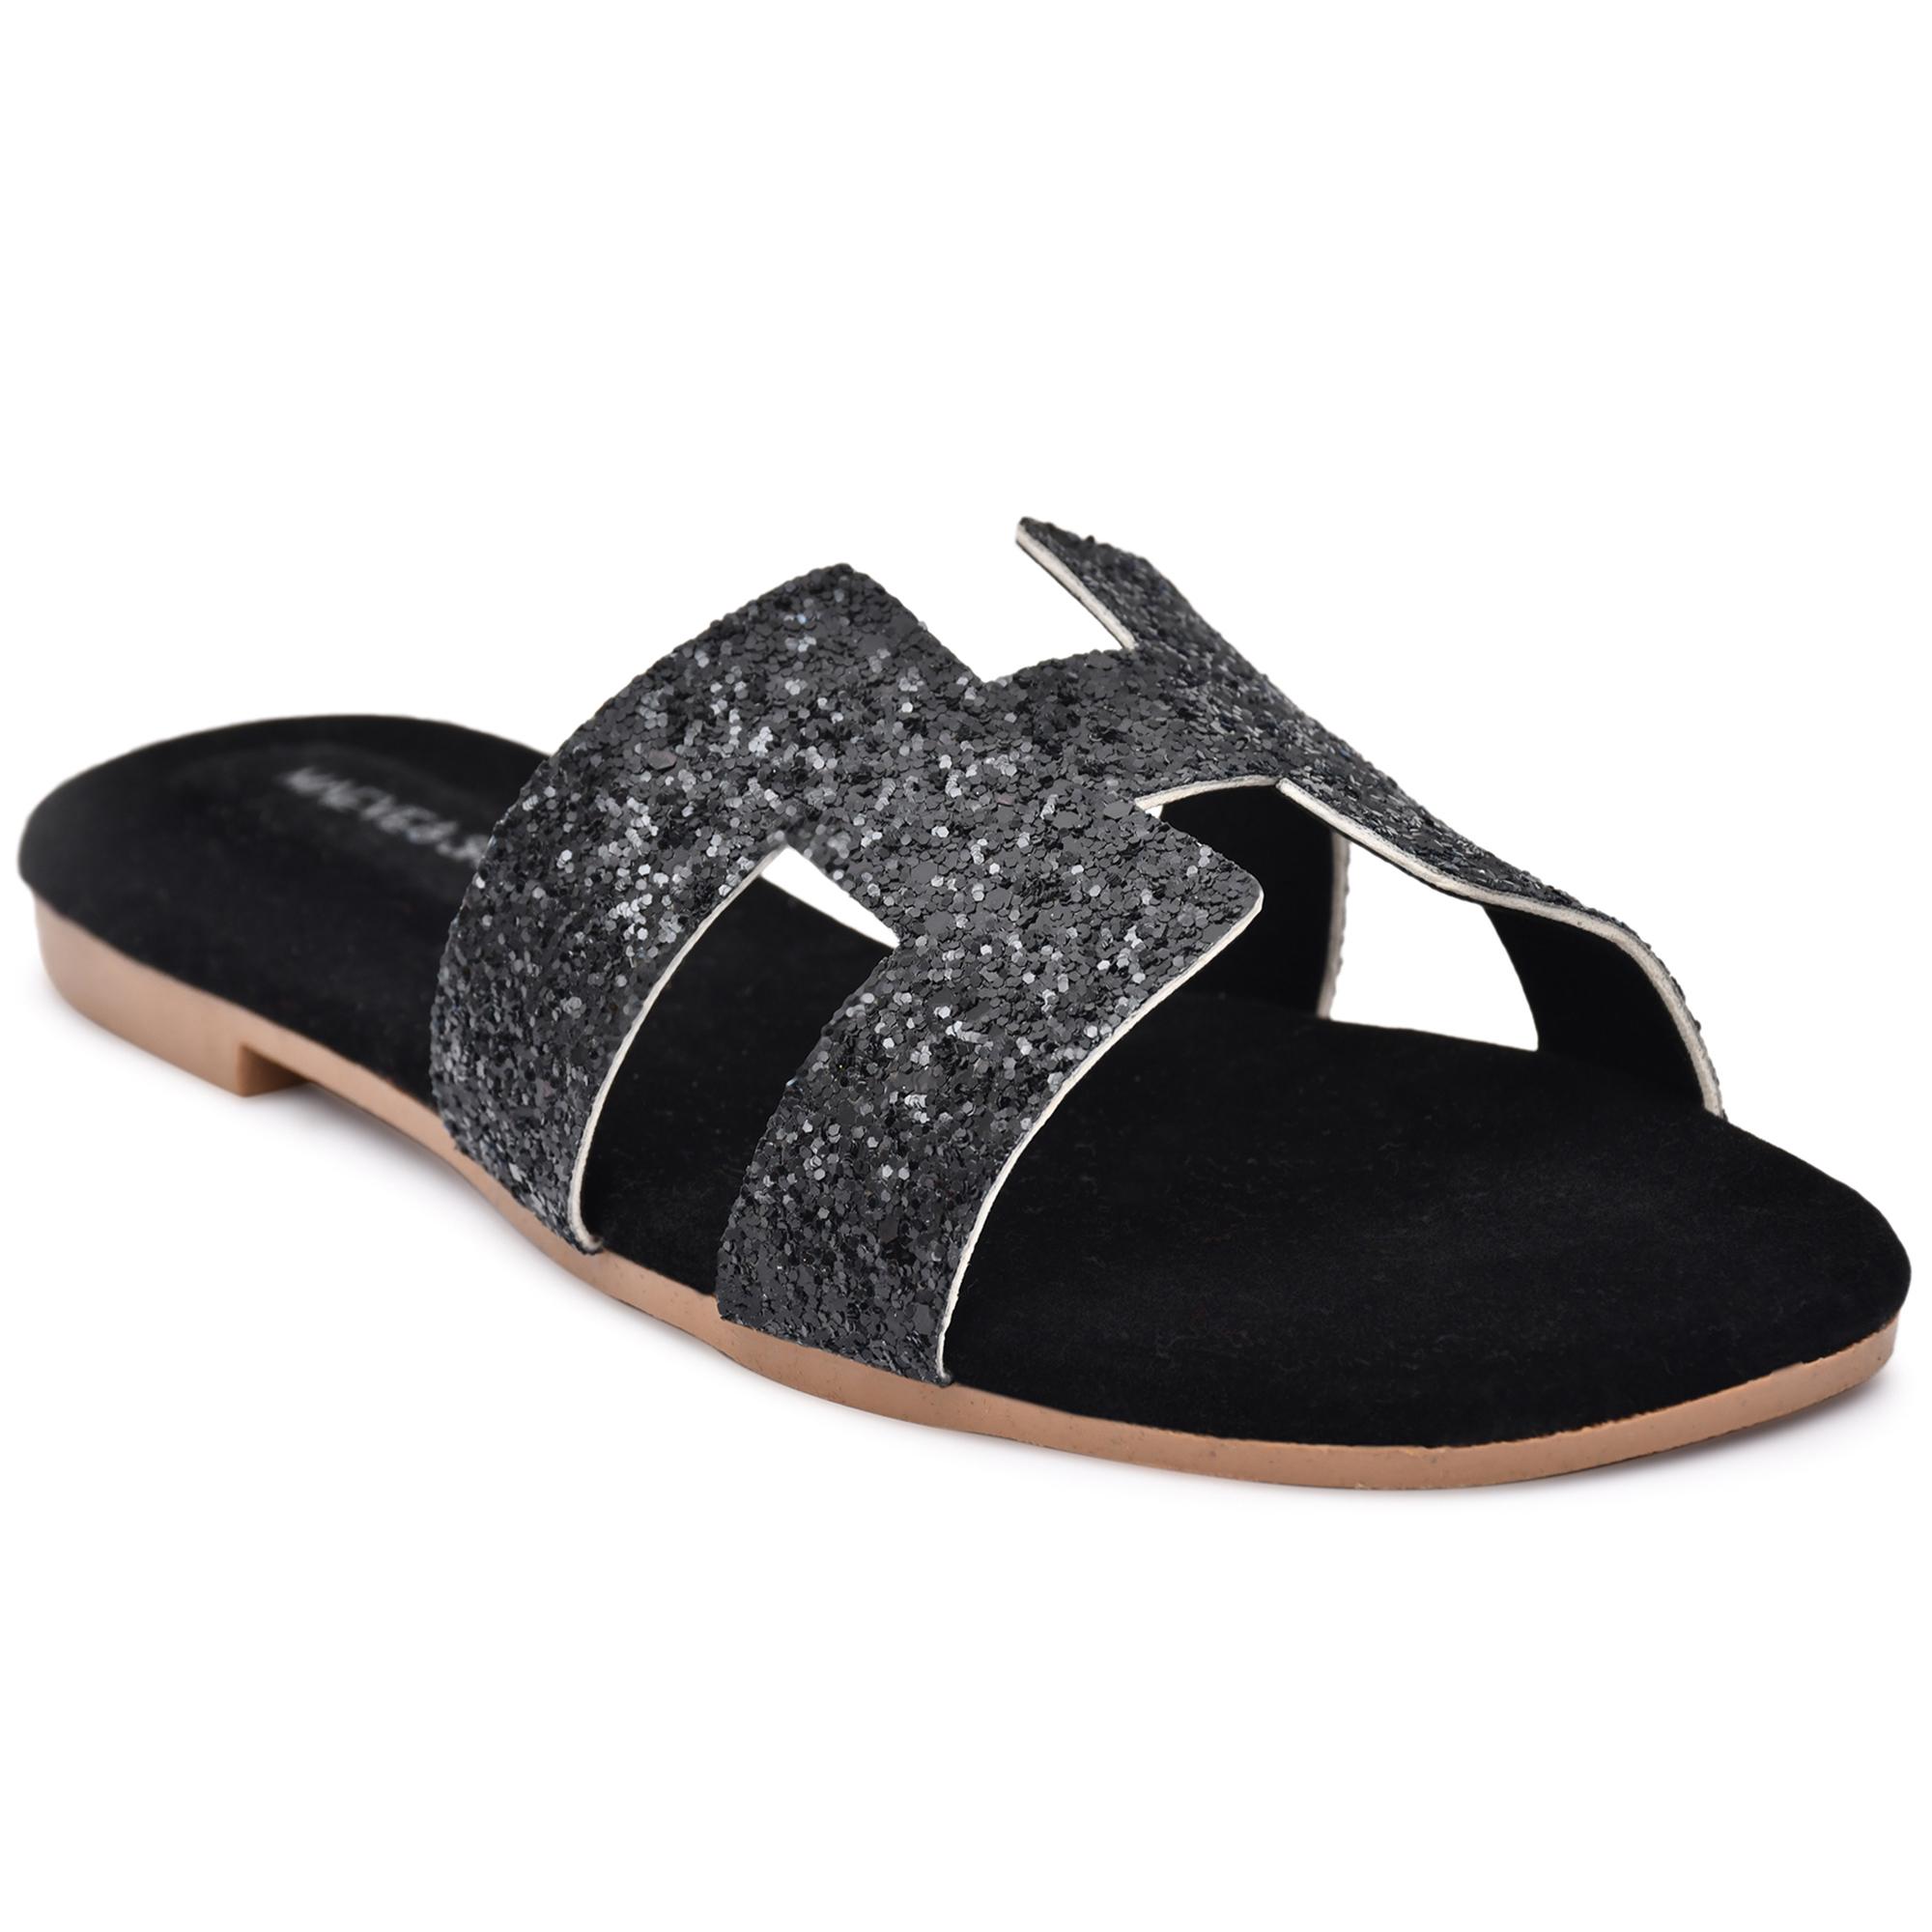 MAEVE AND SHELBY WOMEN BLACK STYLISH FLATS FOR OCCASION AND CASUAL WEAR